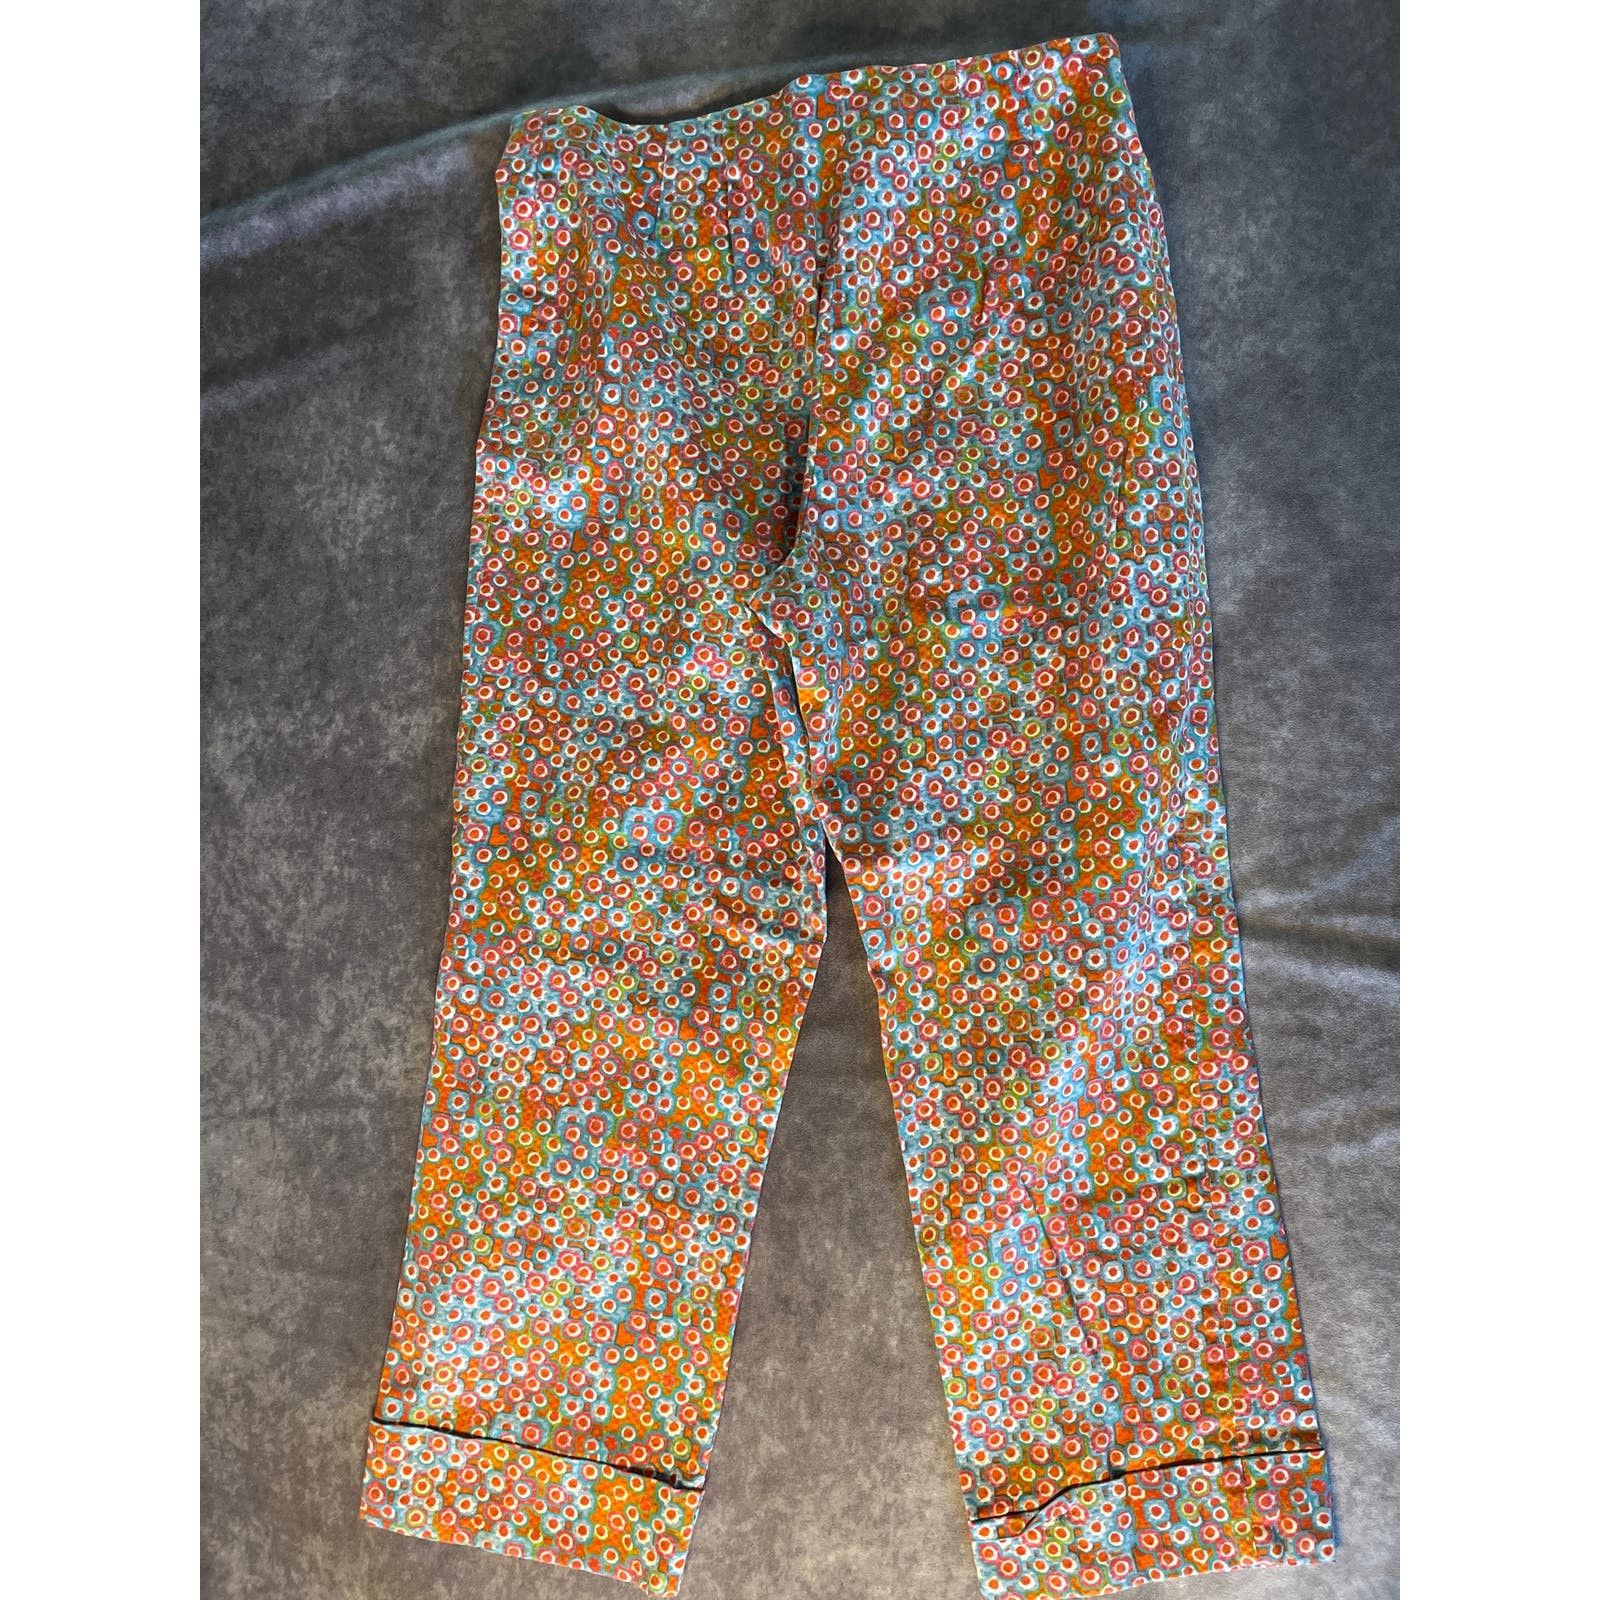 Willi Smith Willi Smith AOP Pants Size 26" / US 2 / IT 38 - 6 Preview